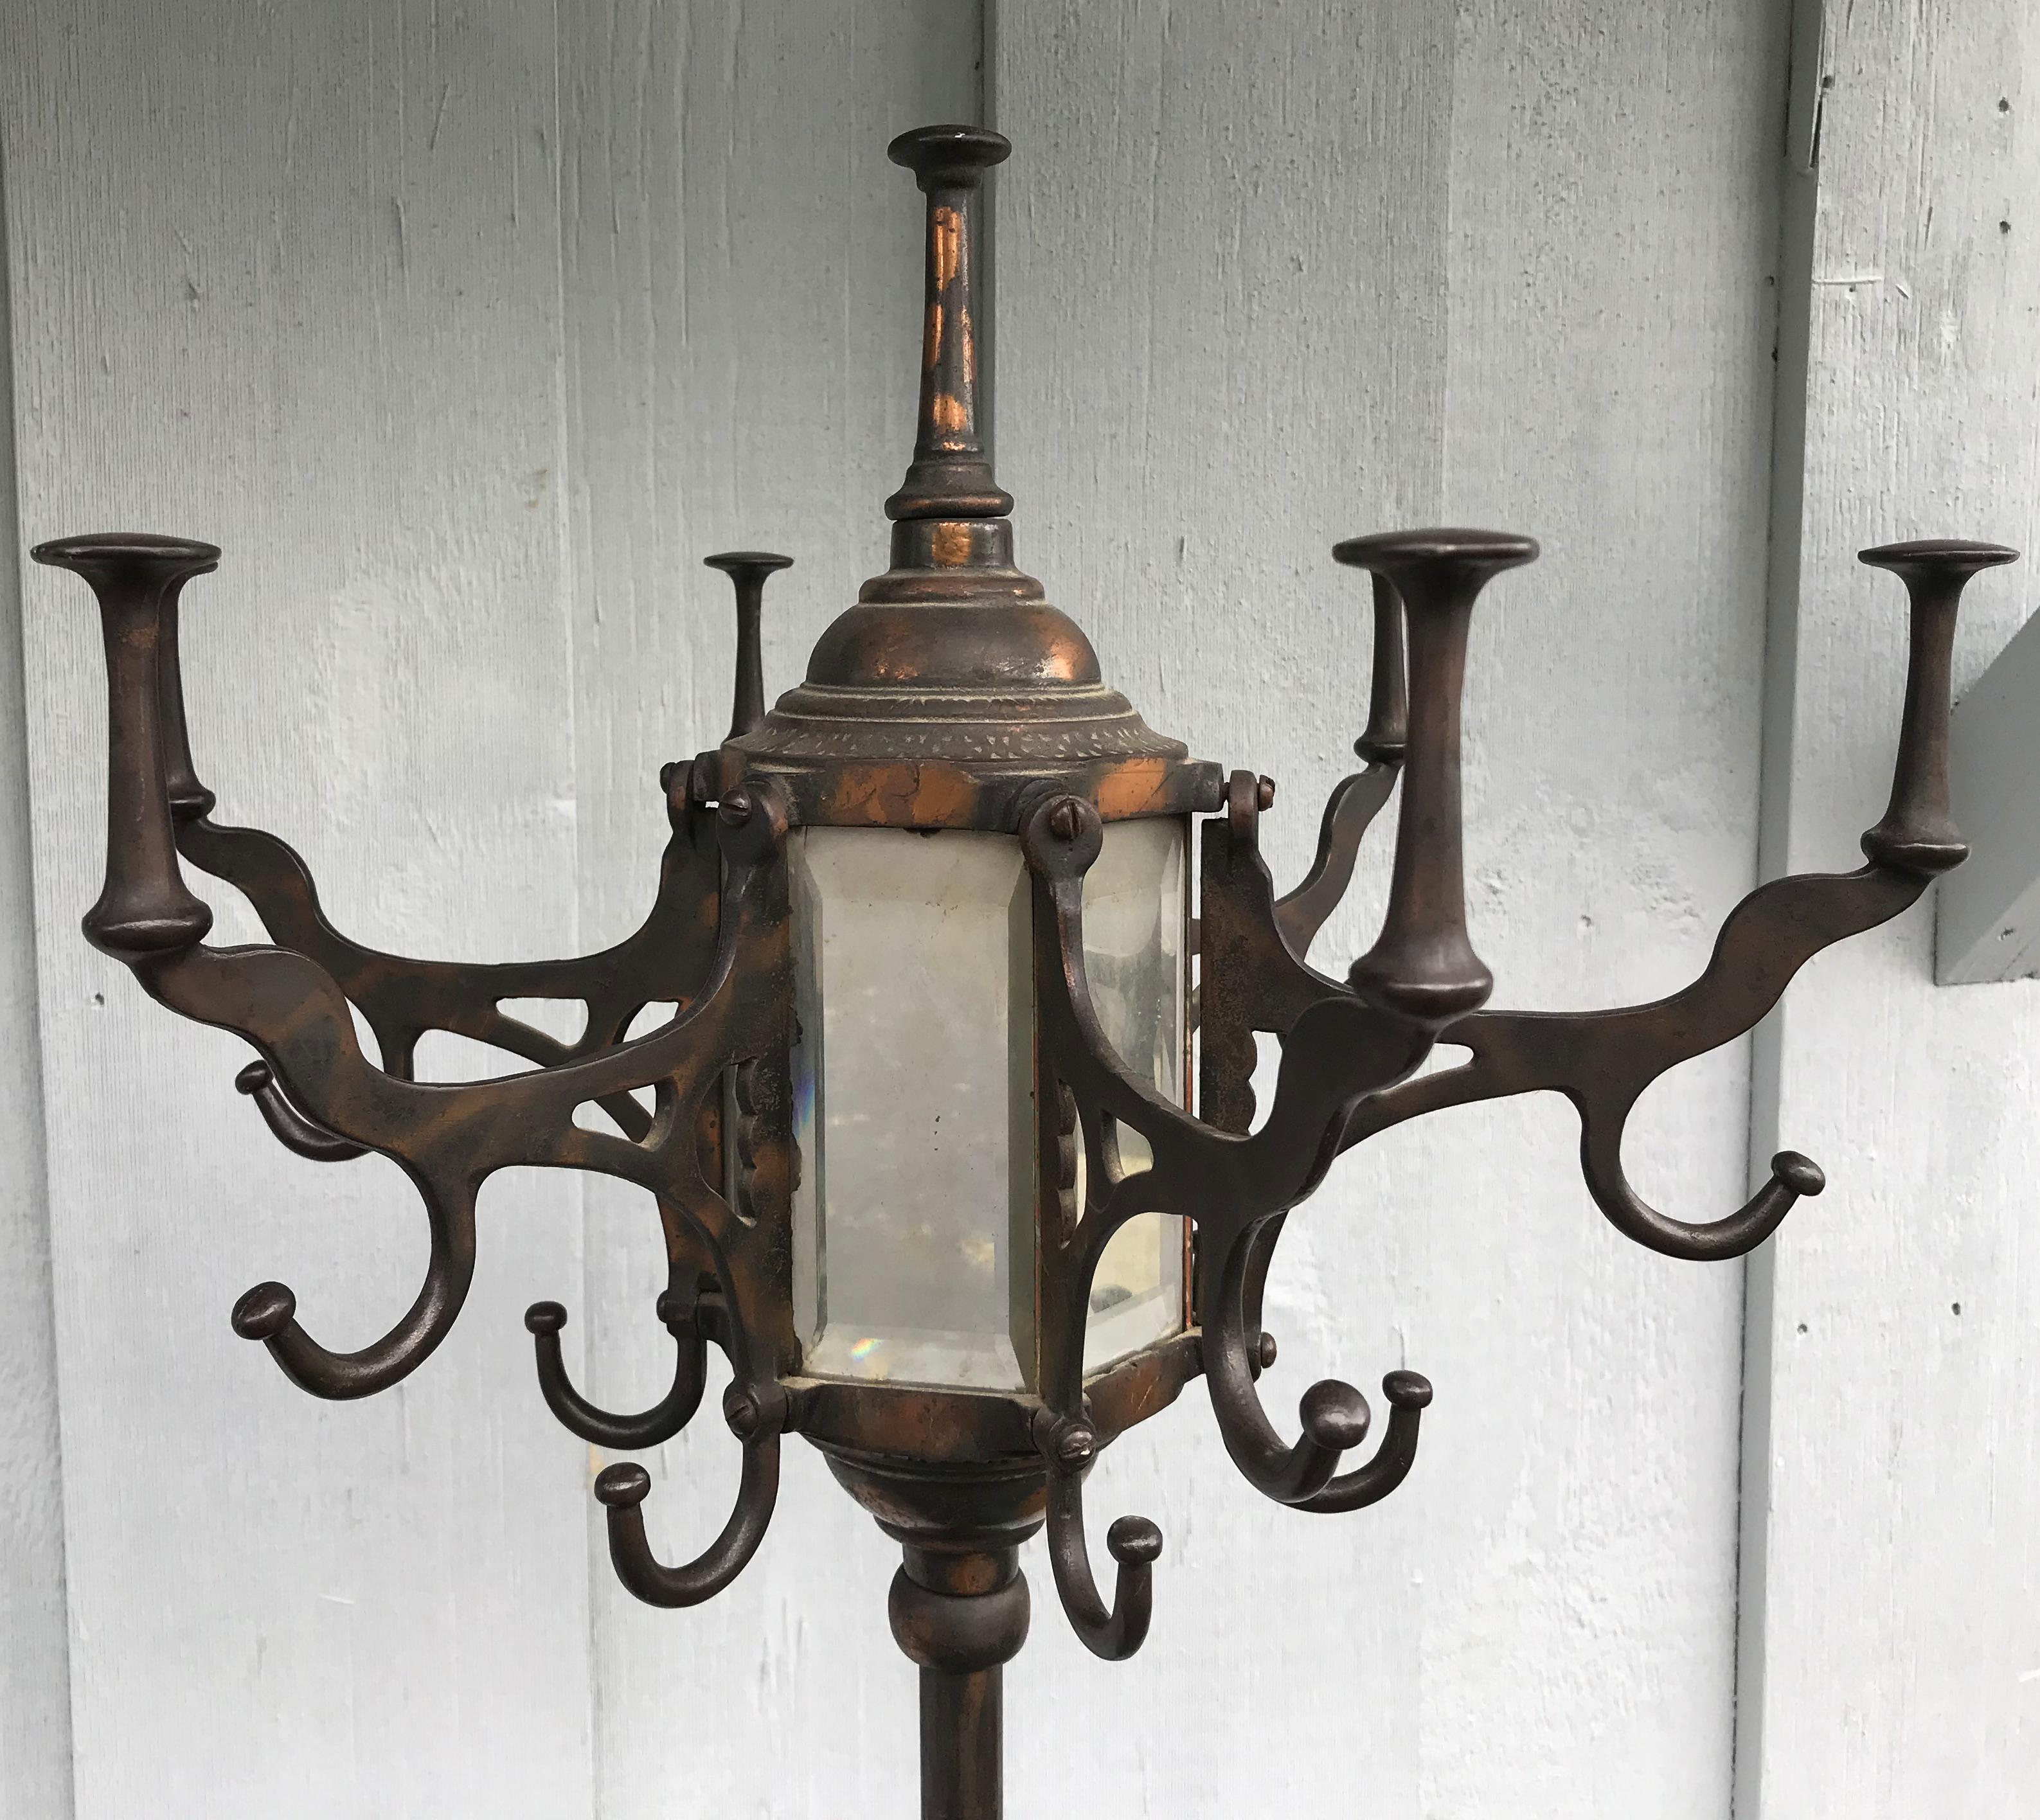 A wonderful copper patinated metal coat tree or hat rack with beveled mirror panels, multiple hooks for coats and hats, an umbrella and cane holder near the star decorated base with catch, supported by four metal legs with small pad feet. Dates to